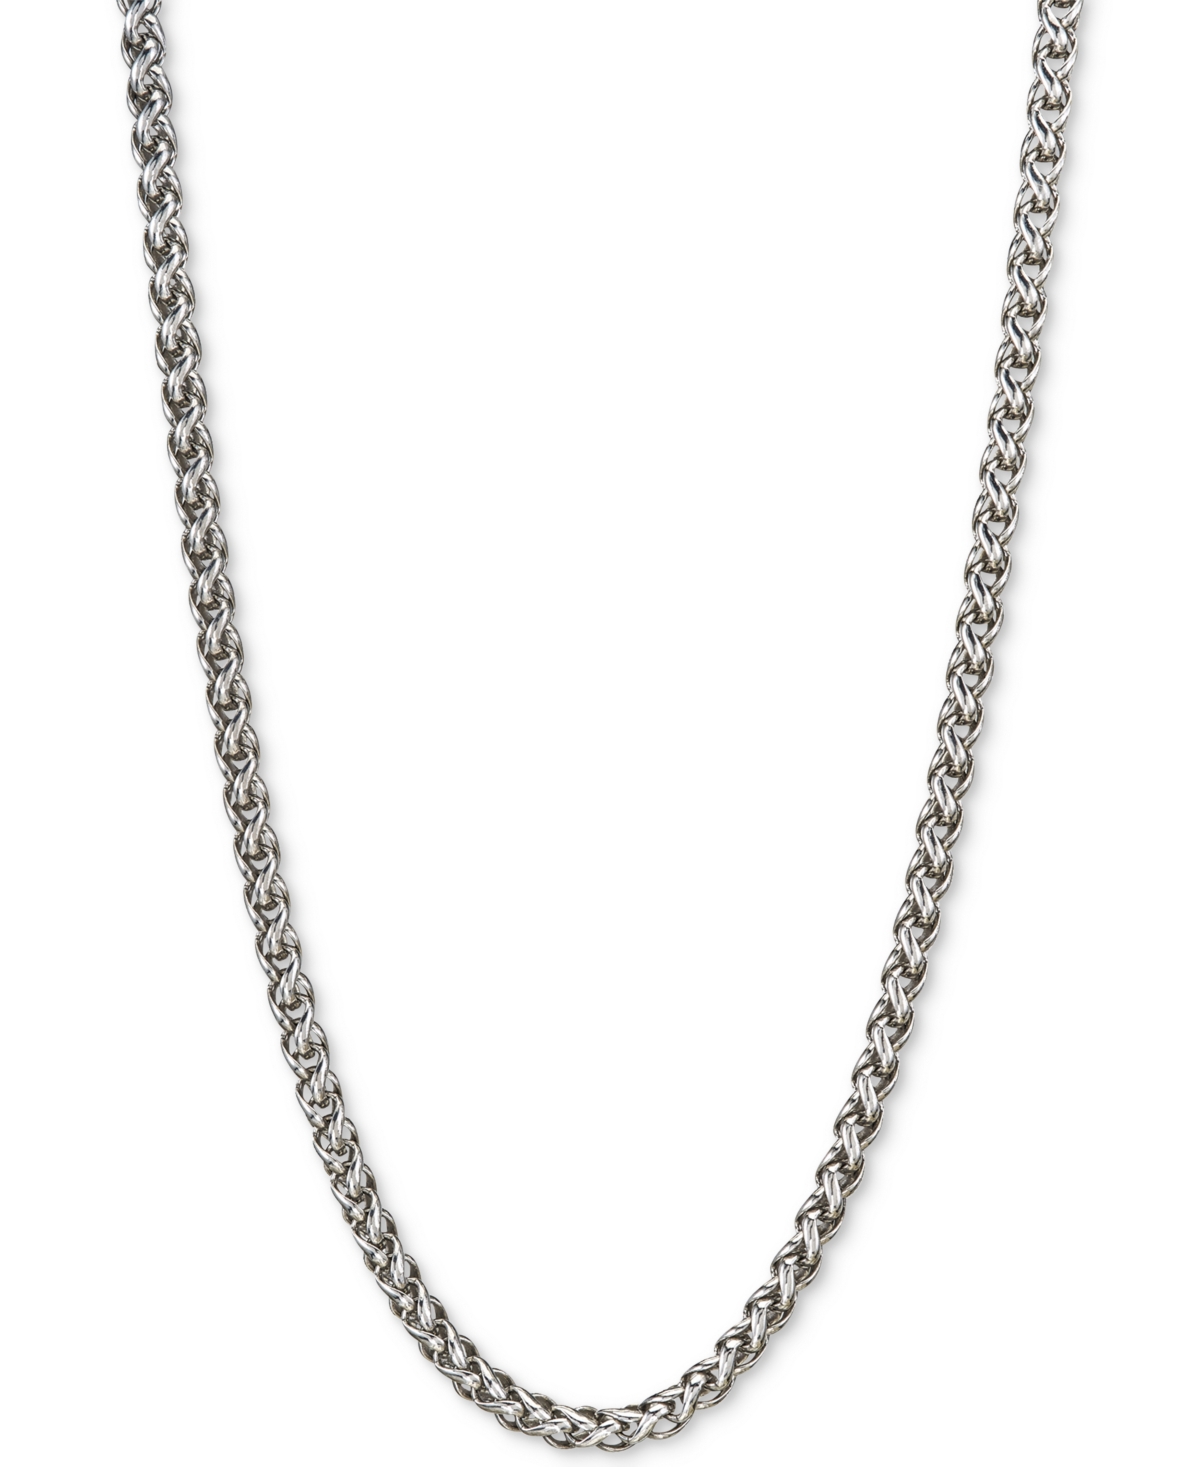 22" Wheat Chain Necklace in Sterling Silver, Created for Macy's - Silver